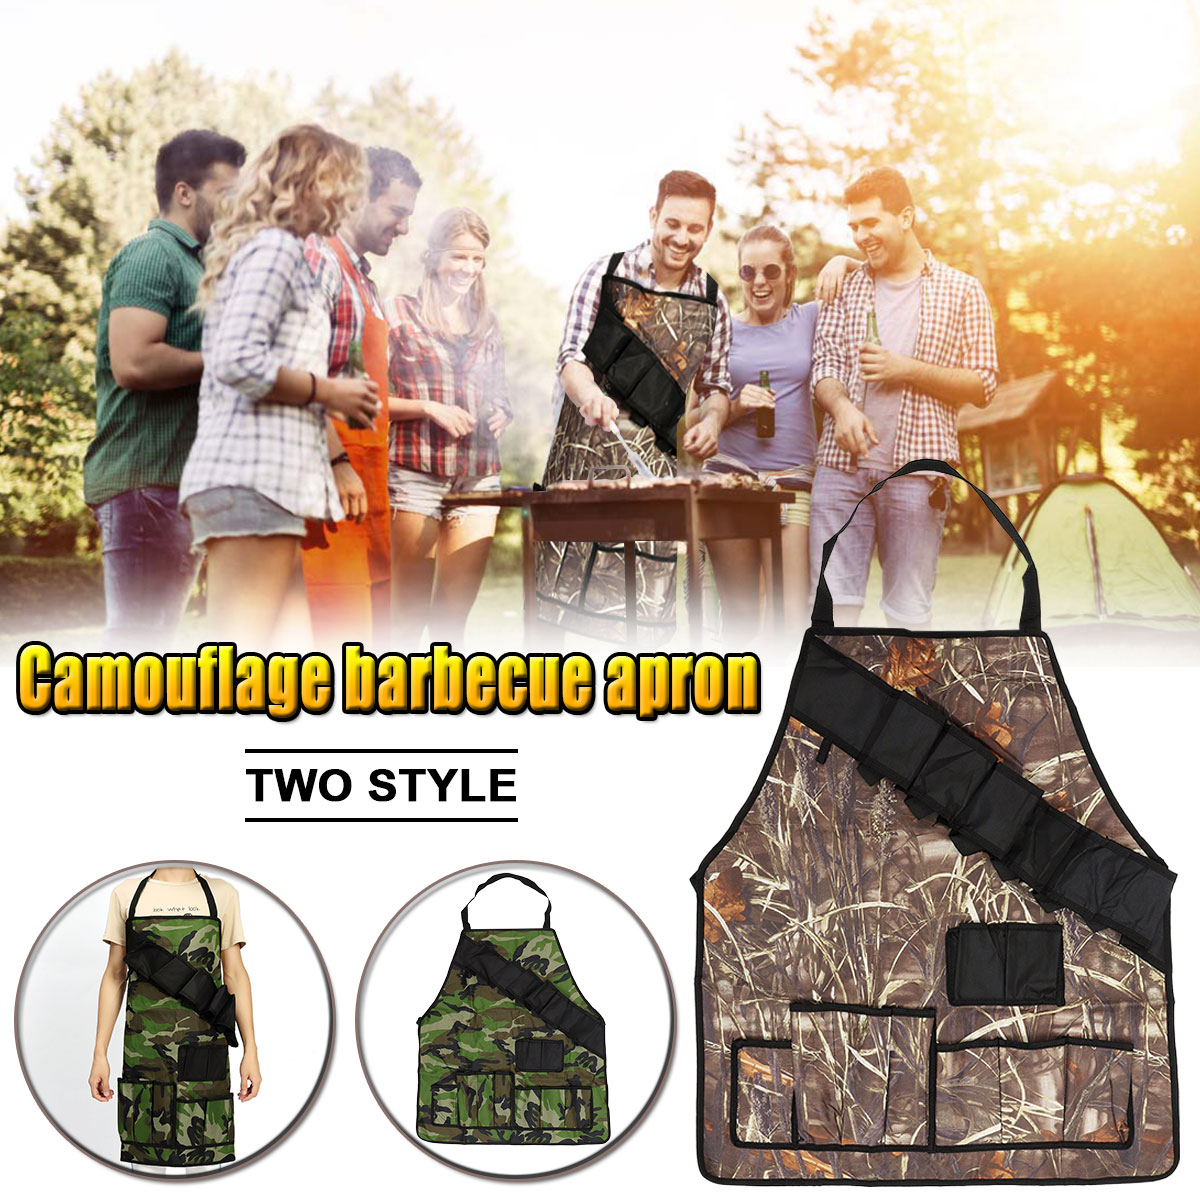 Outdoor-BBQ-Barbecue-Cooking-Waterproof-Aprons-With-Beer-Can-Opener-Belt-Camping-Picnic-1319308-1